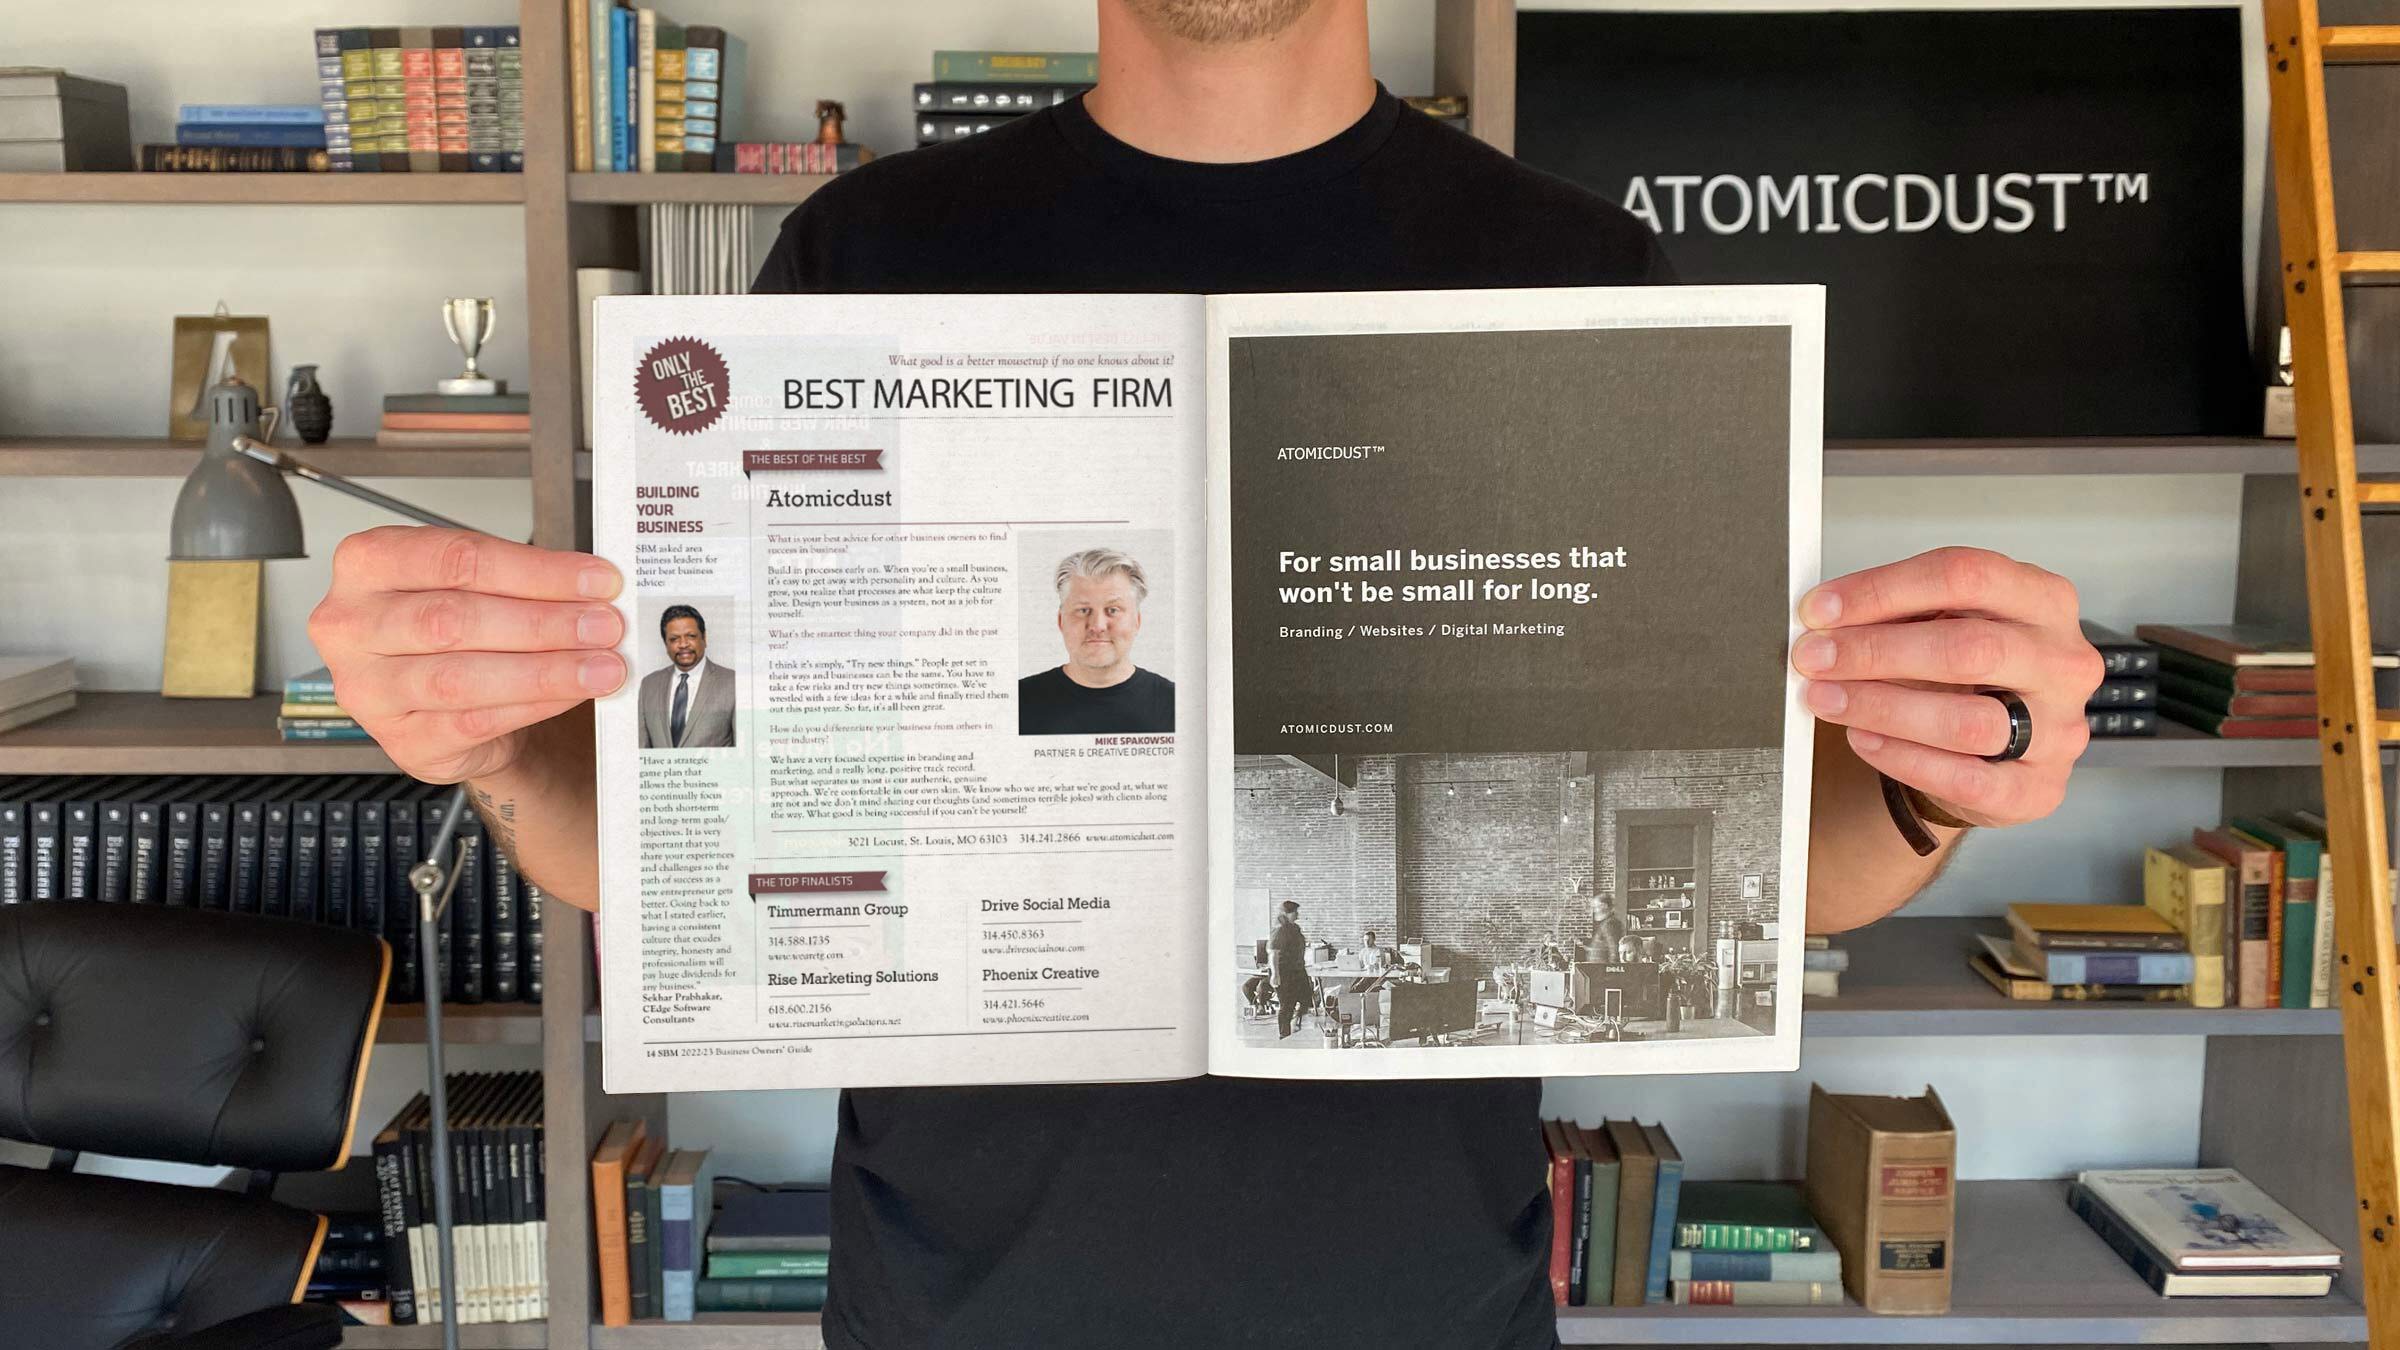 An Atomicdust team member holds the Small Business Monthly issue announcing Atomicdust as Best Marketing Firm